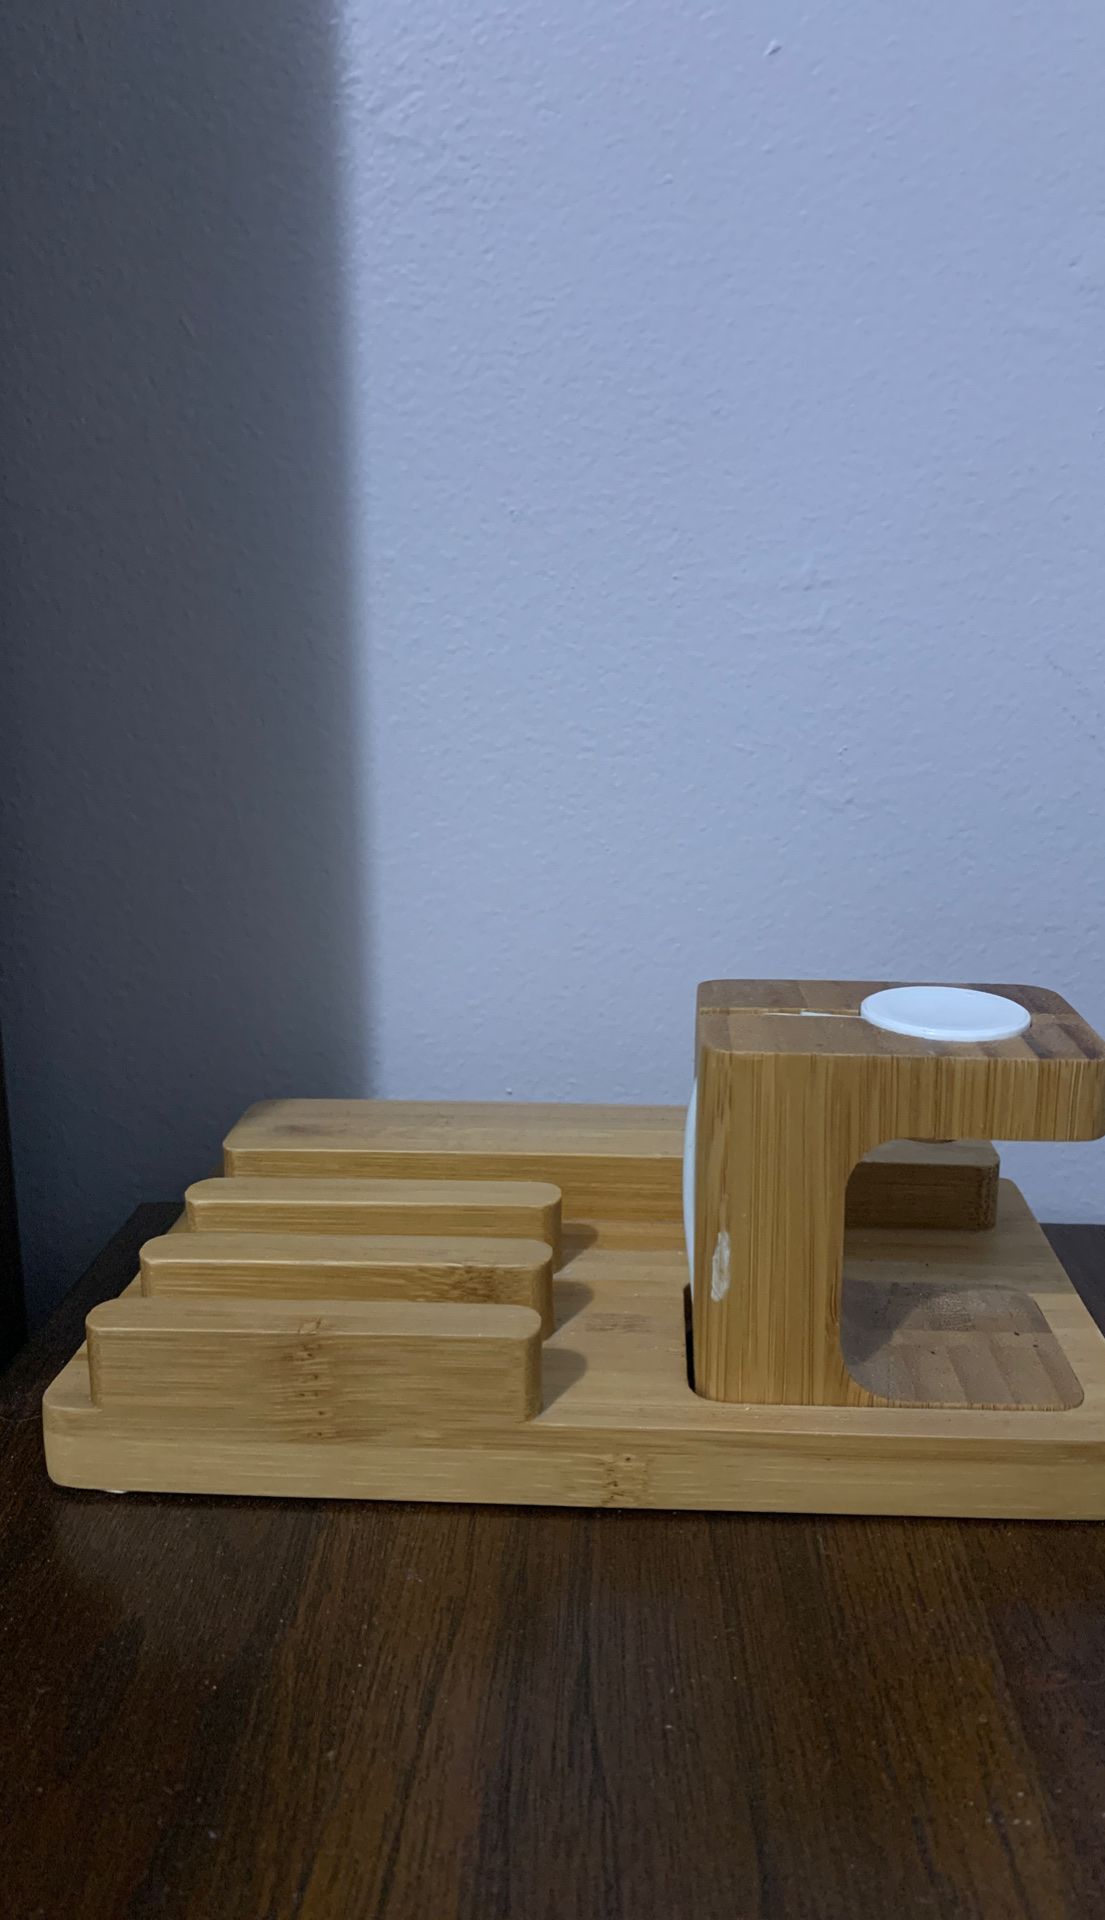 Bamboo desk organizer / phone charger